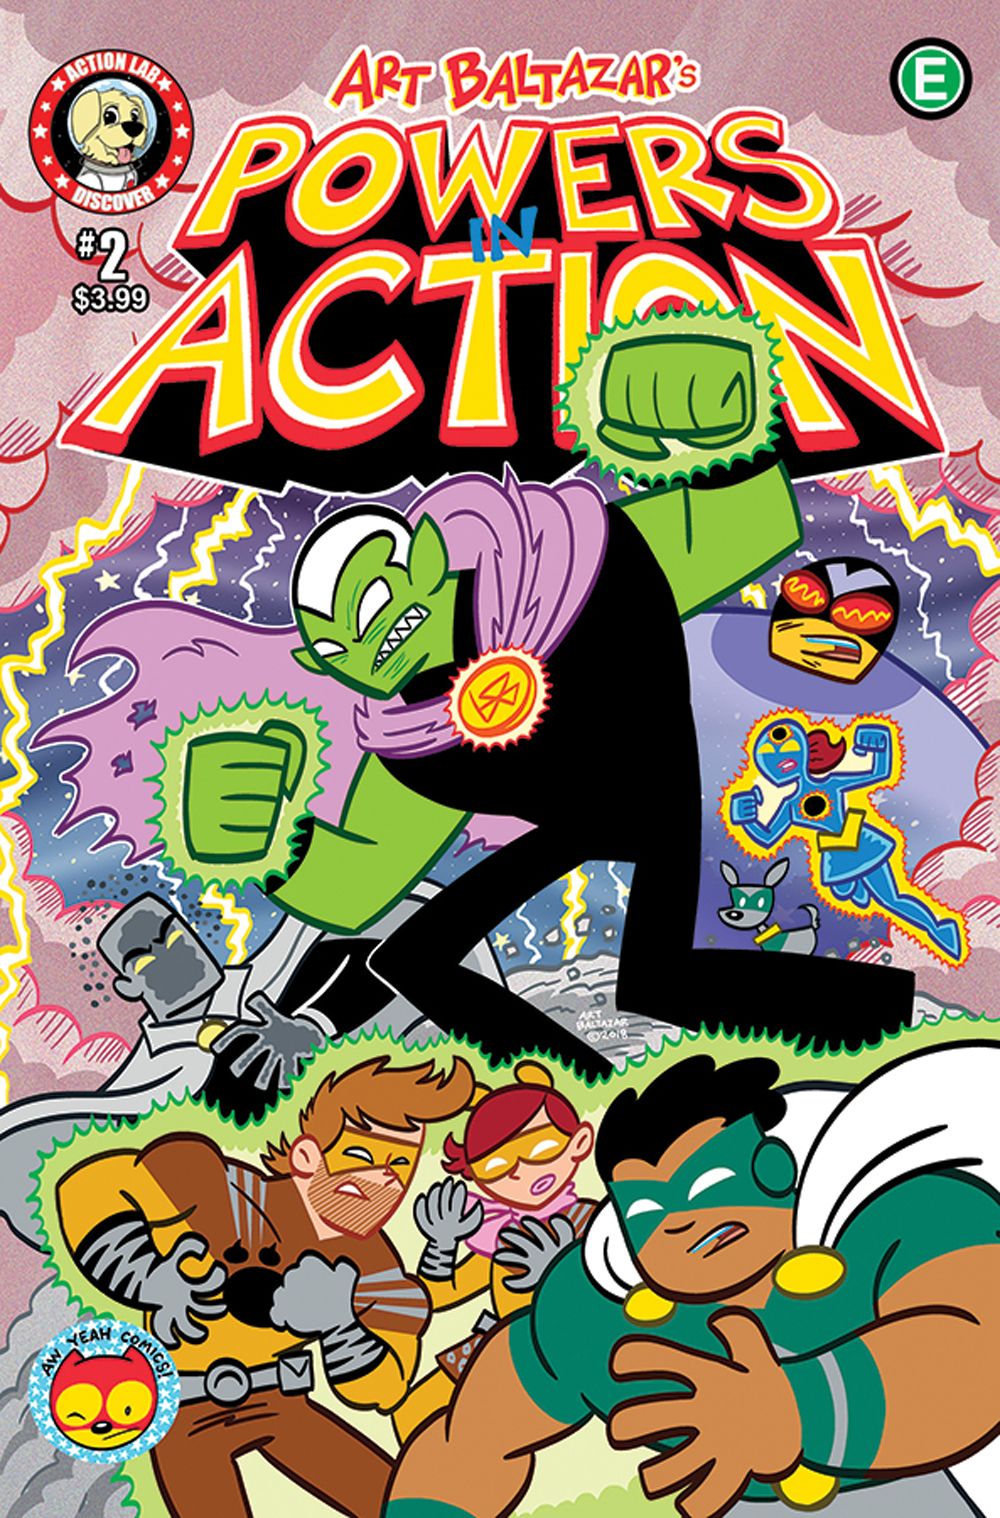 Powers in Action no. 2 (2019 Series)